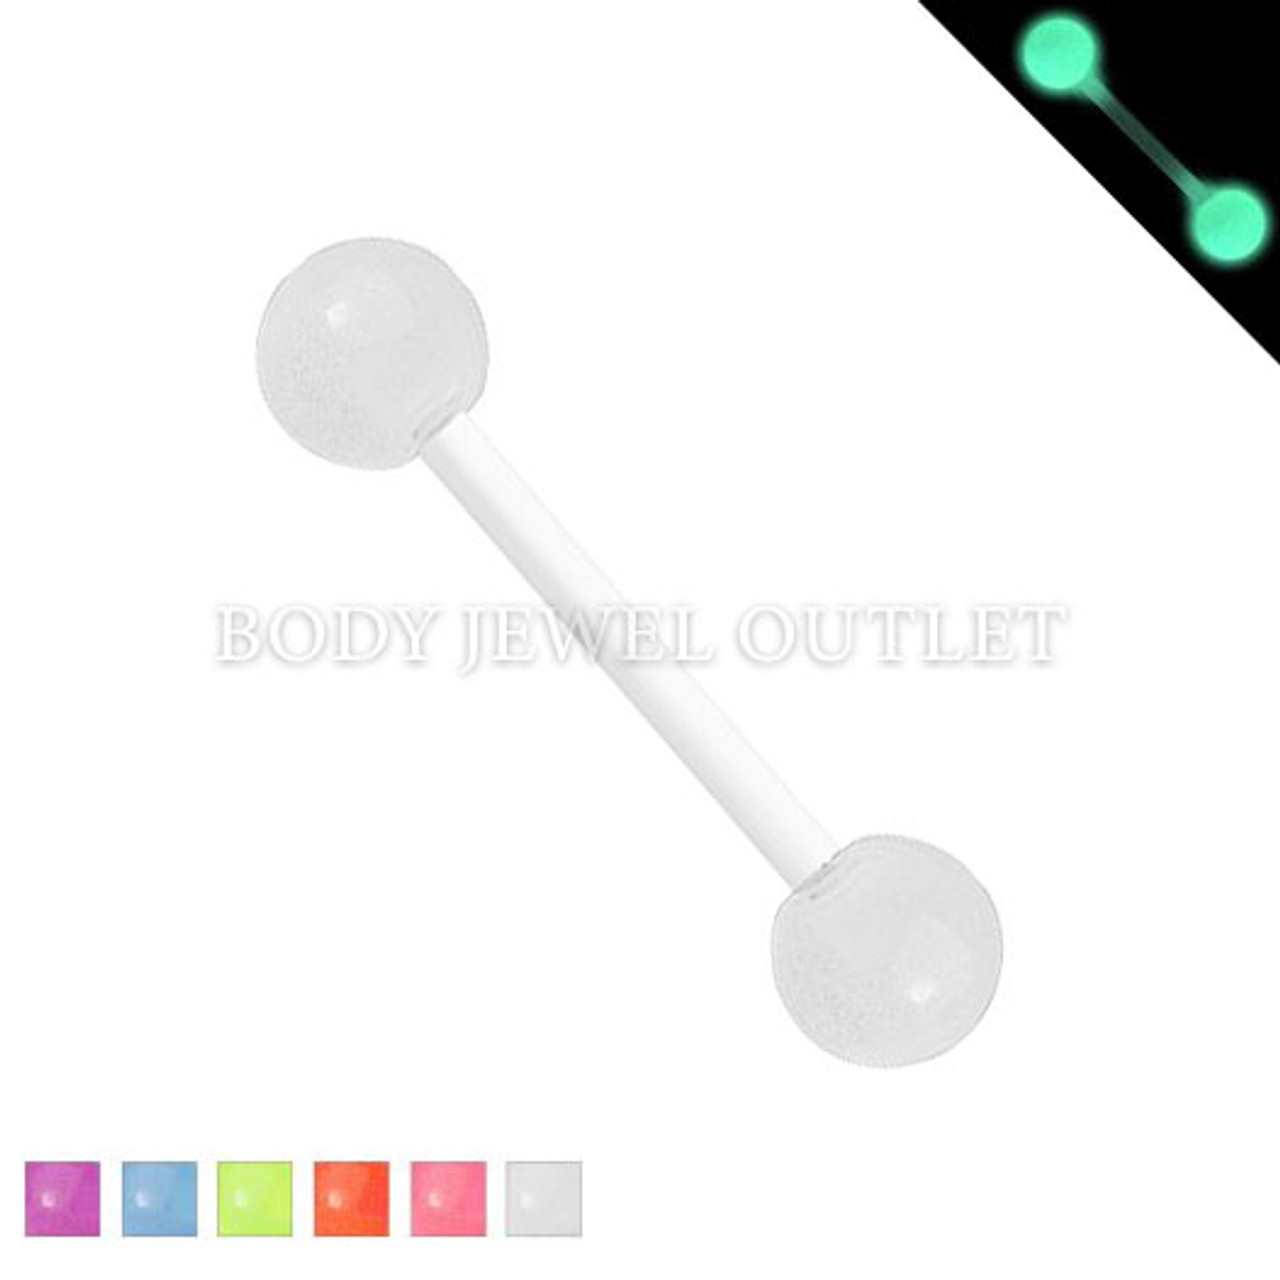 GLOW IN THE DARK VIBRANT STAR TONGUE RING PIERCING BARBELL 14 Gauge 5/8" JEWELRY 